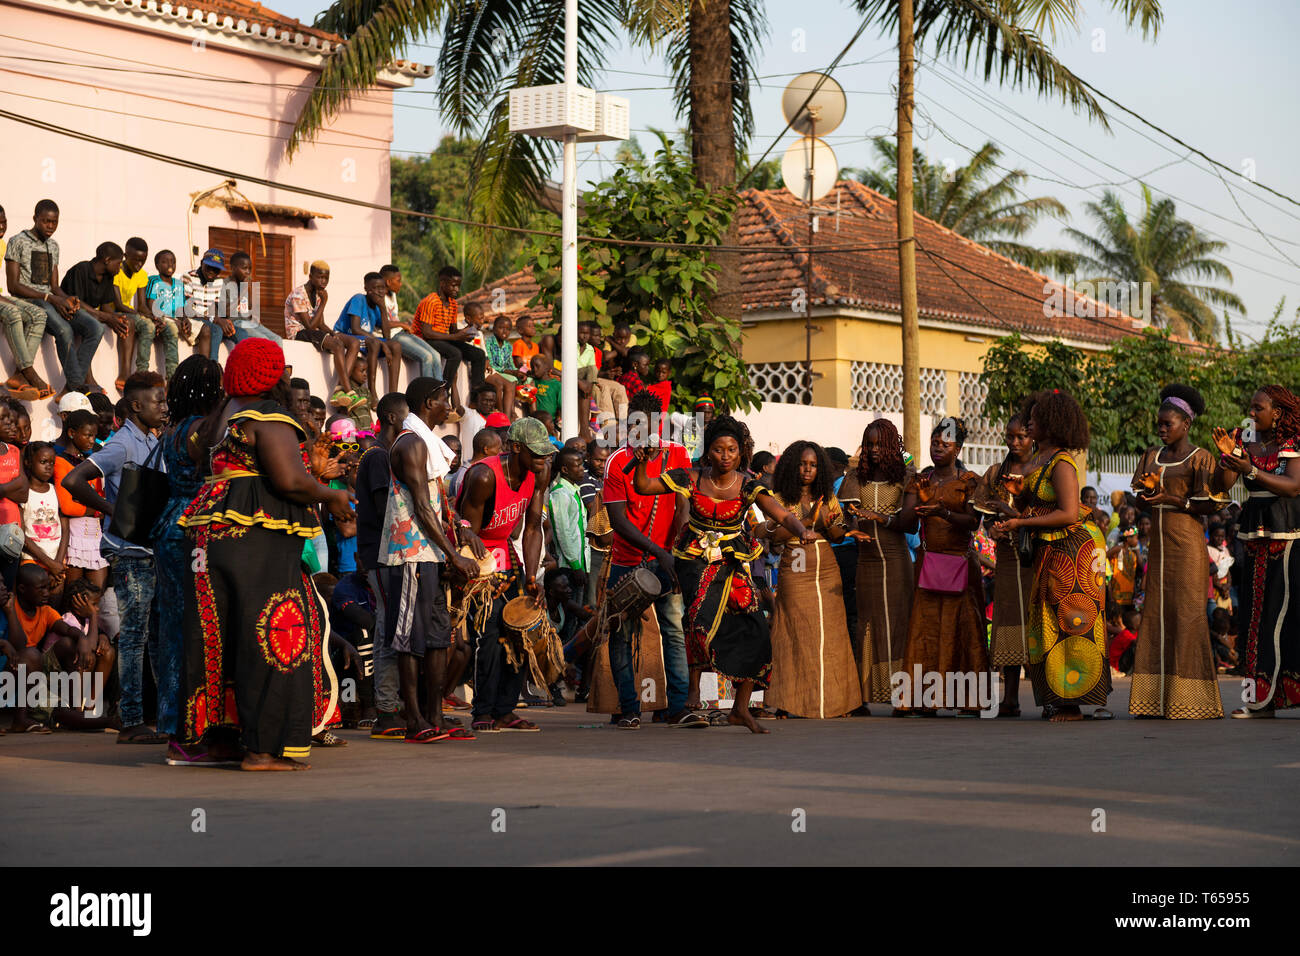 Bissau, Republic of Guinea-Bissau - February 12, 2018: Group of people performing during the Carnival Celebrations in the city of Bisssau. Stock Photo